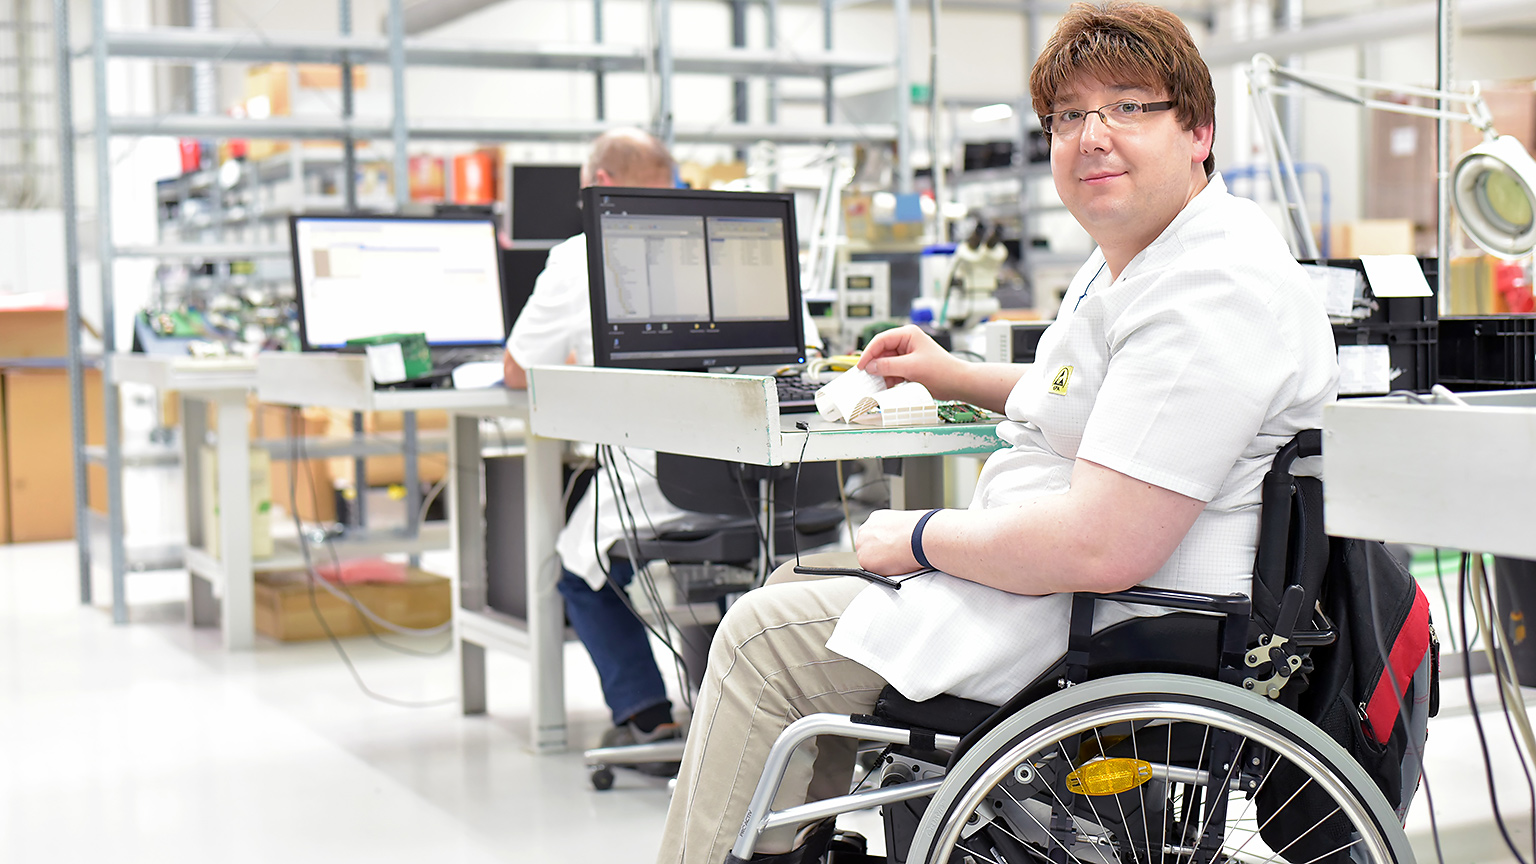 A man who uses a wheelchair works at a computer in a technology sector office.